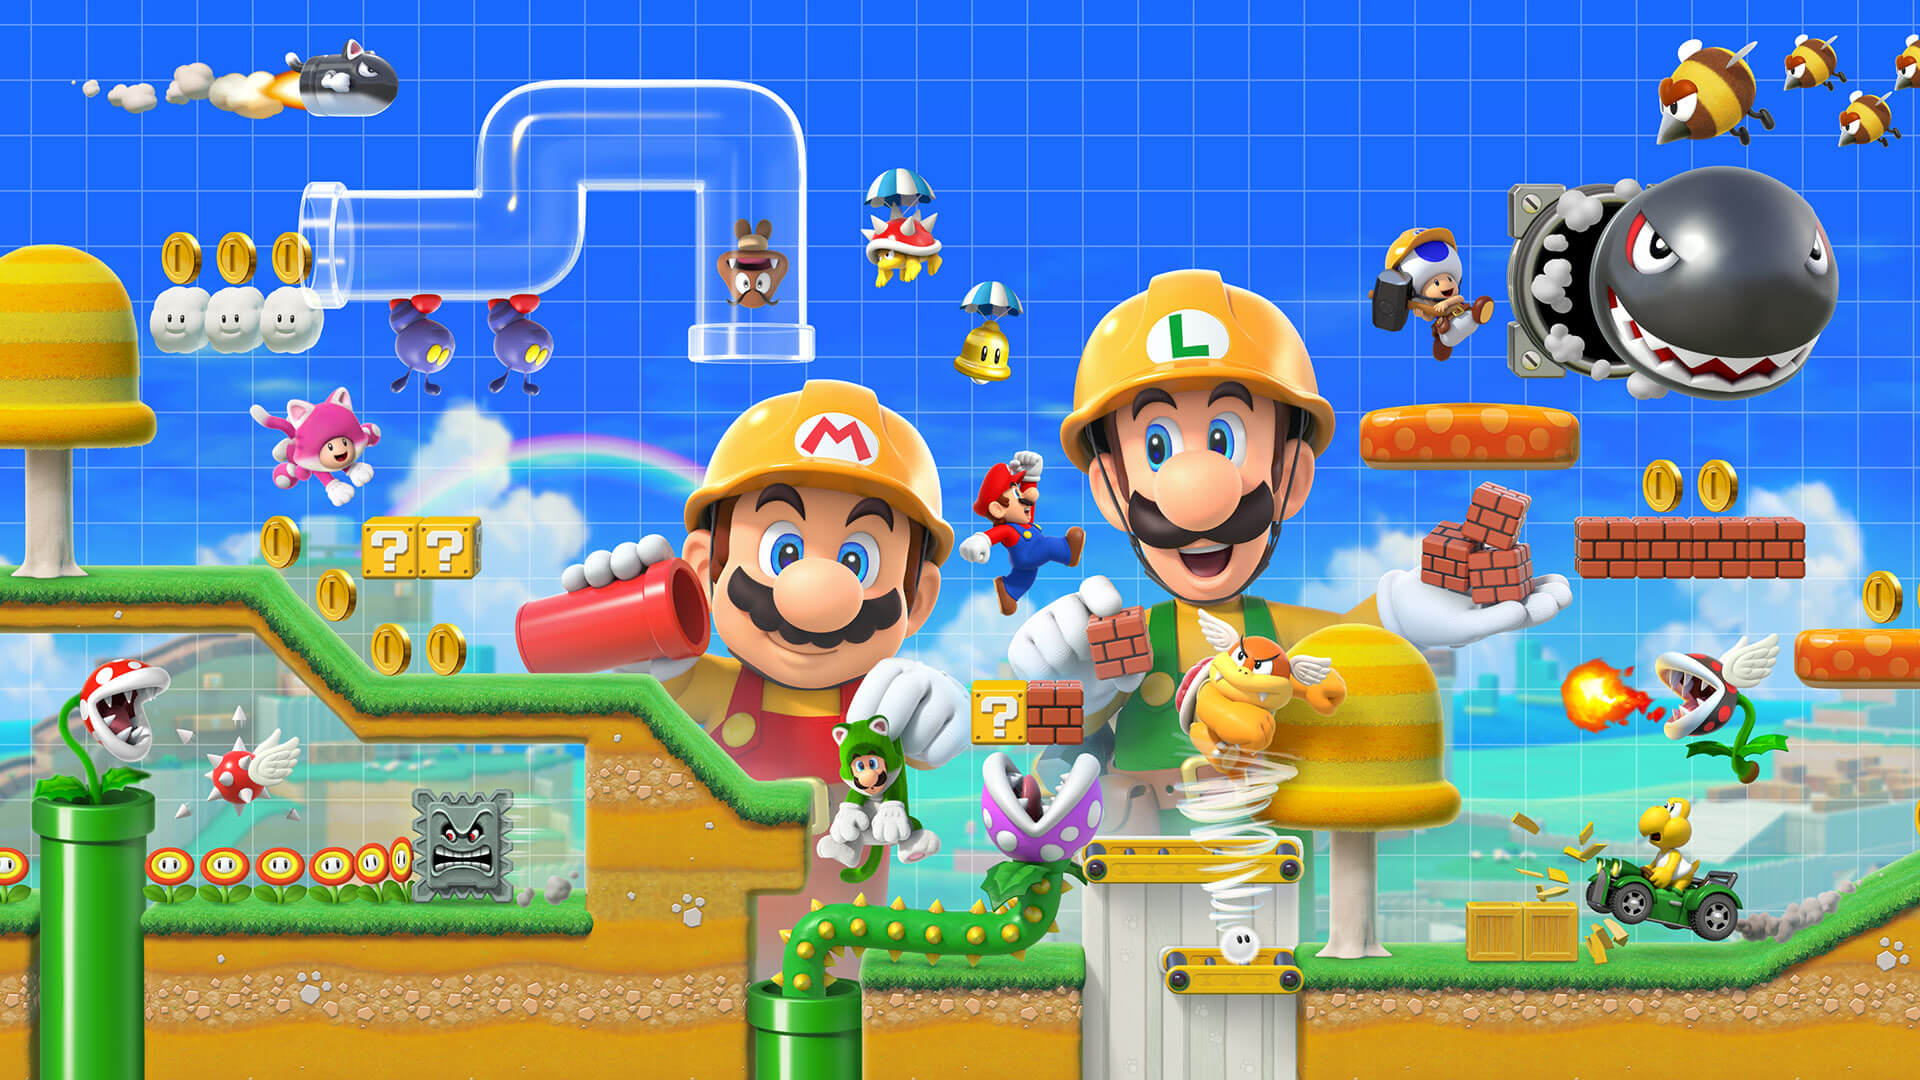 Can't load in Course World in Super Mario Maker 2 on yuzu - Yuzu Support  - Citra Community